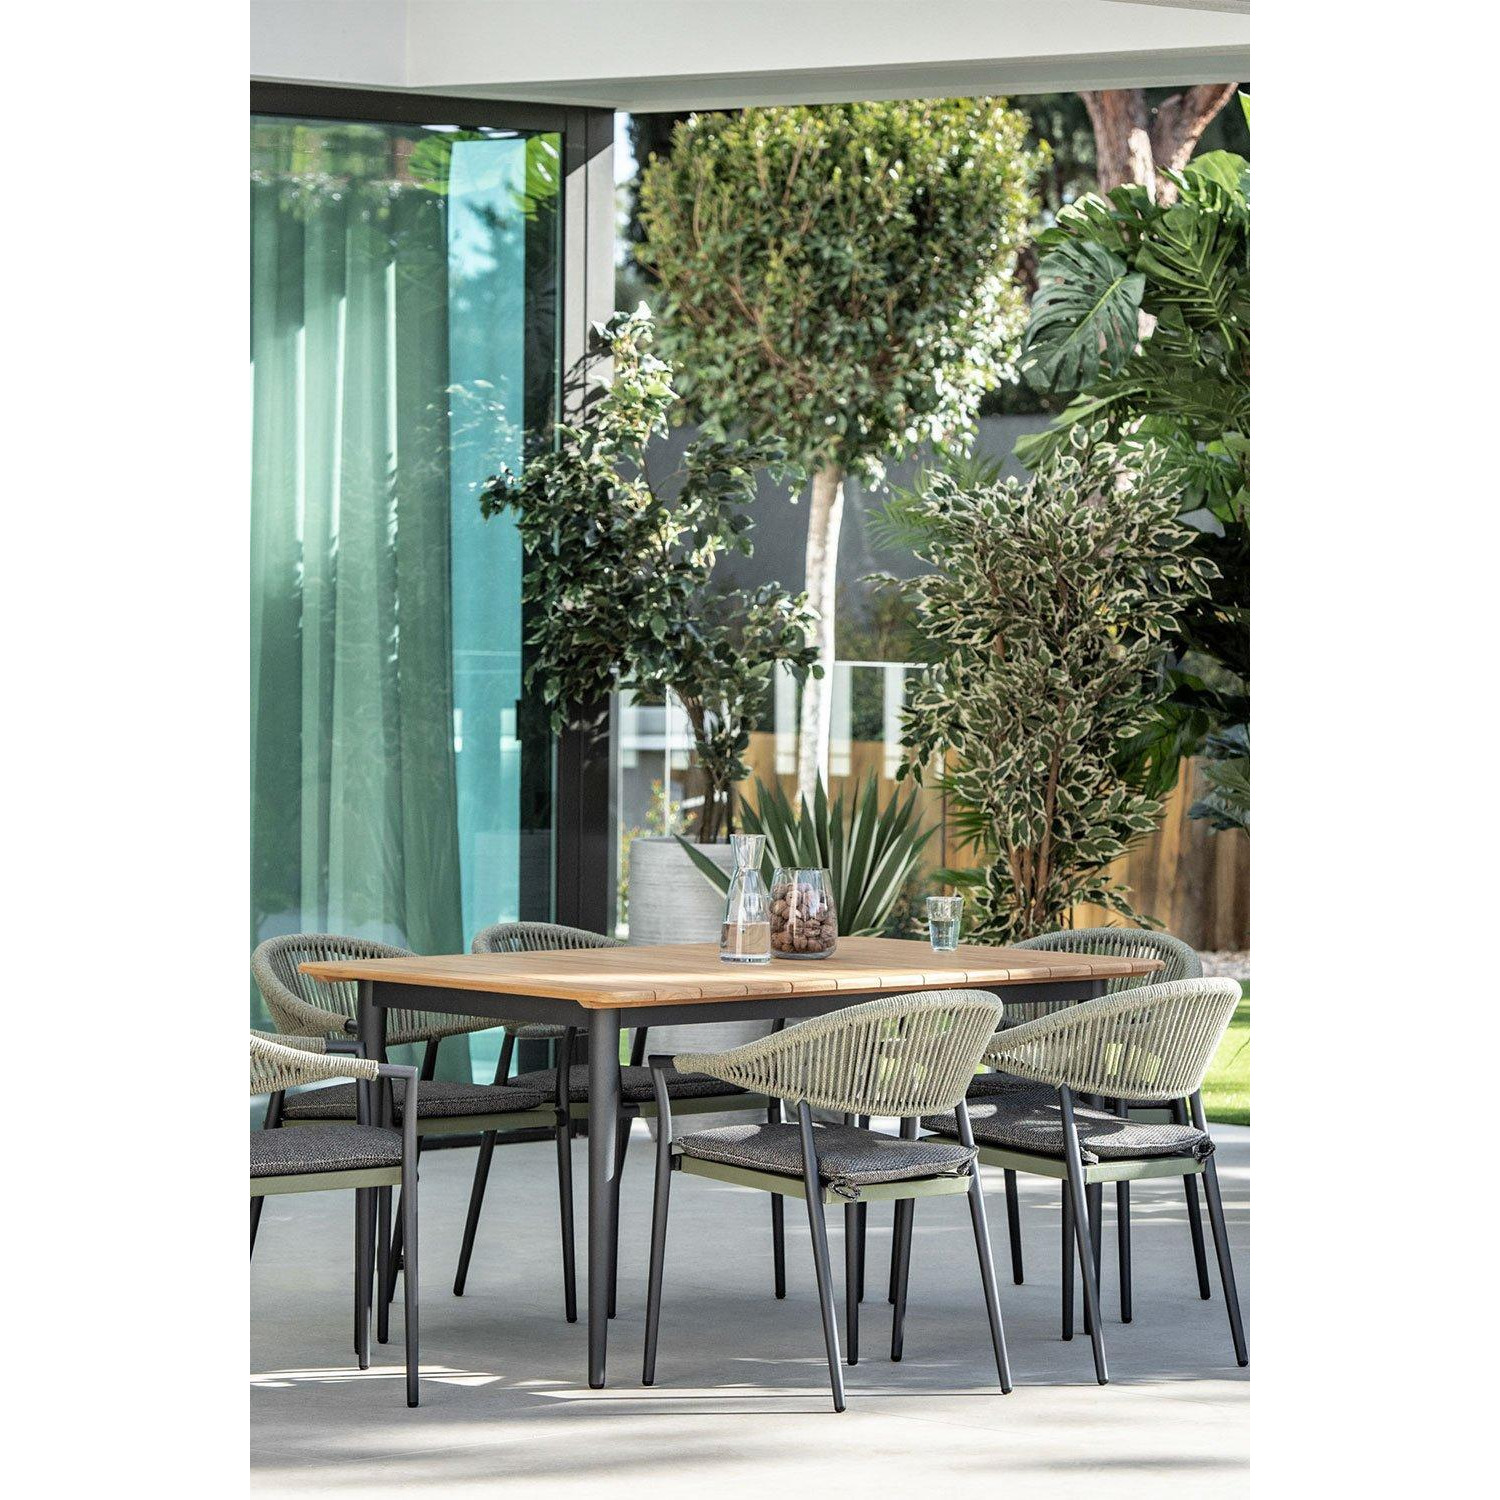 Cloverly 6 Seat Rectangular Dining with Teak Table in Charcoal - image 1